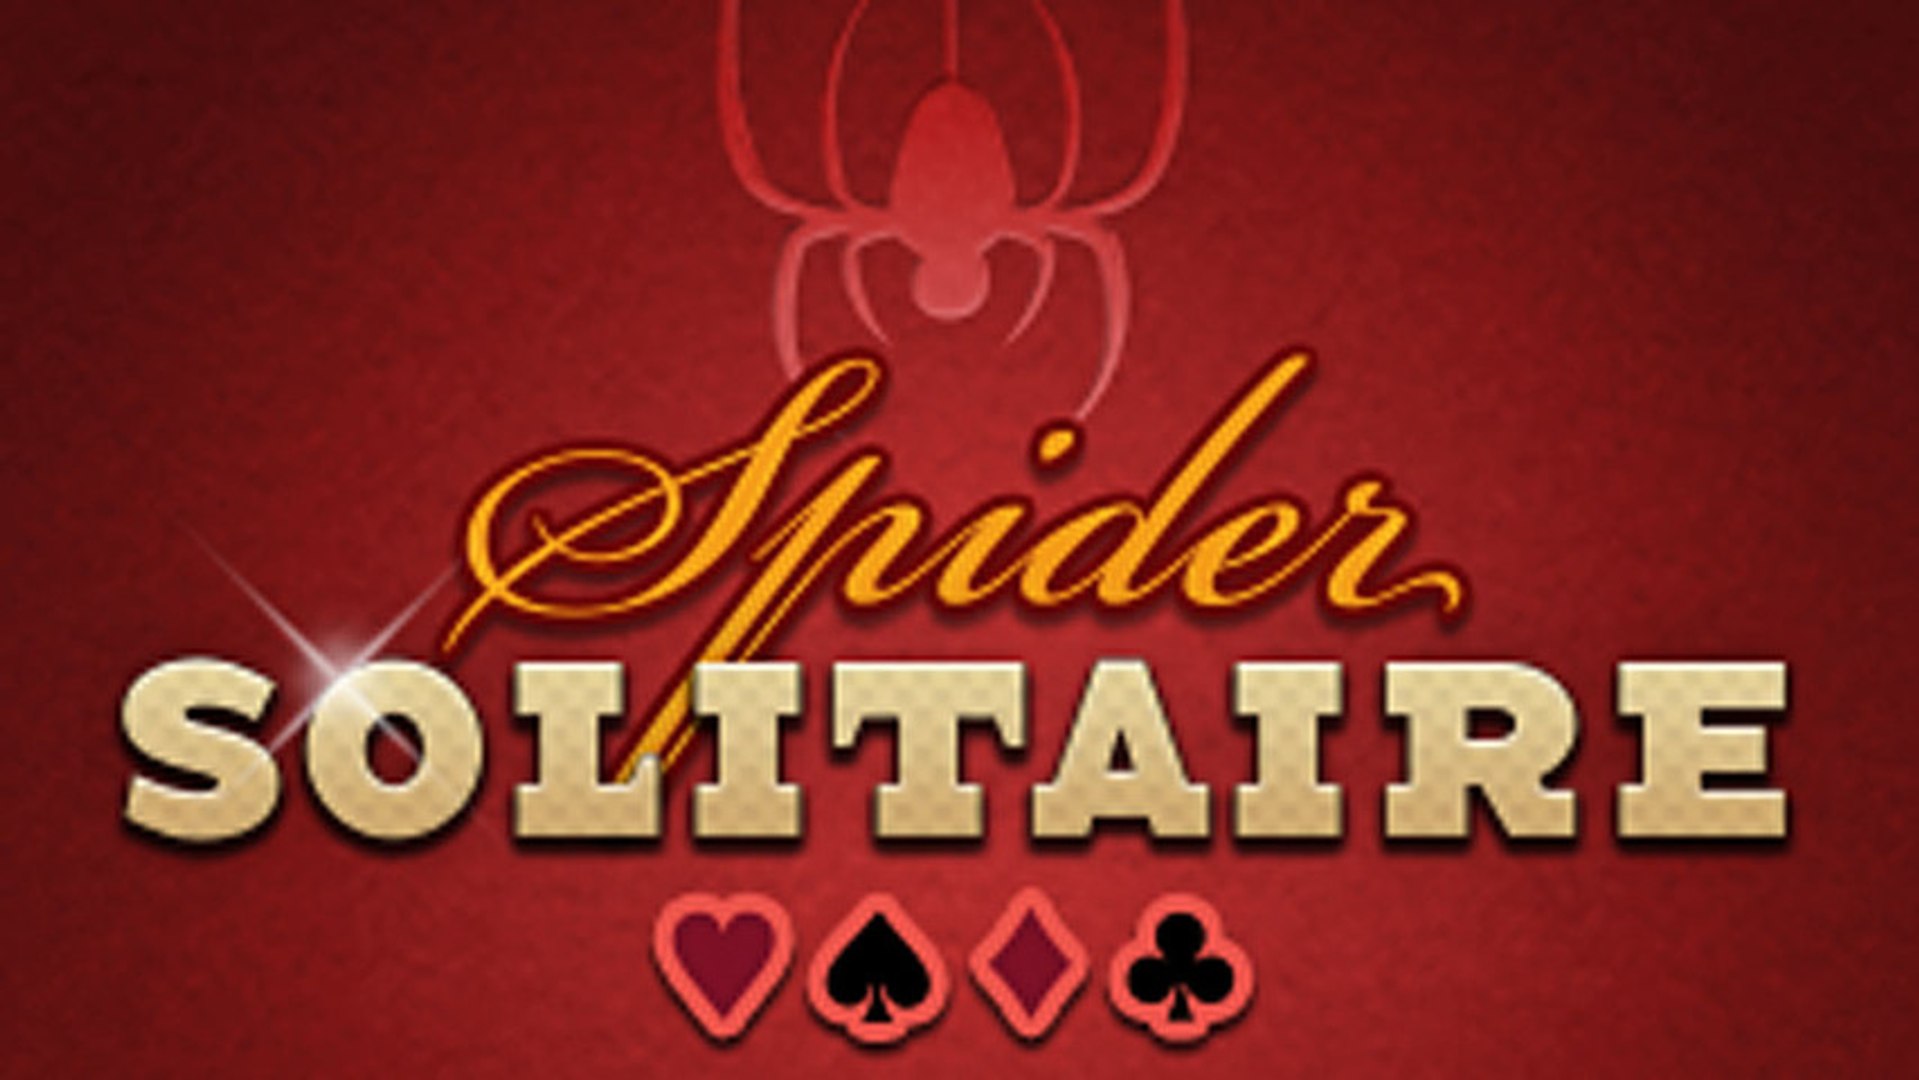 CGR Trailers - SPIDER SOLITAIRE Trailer